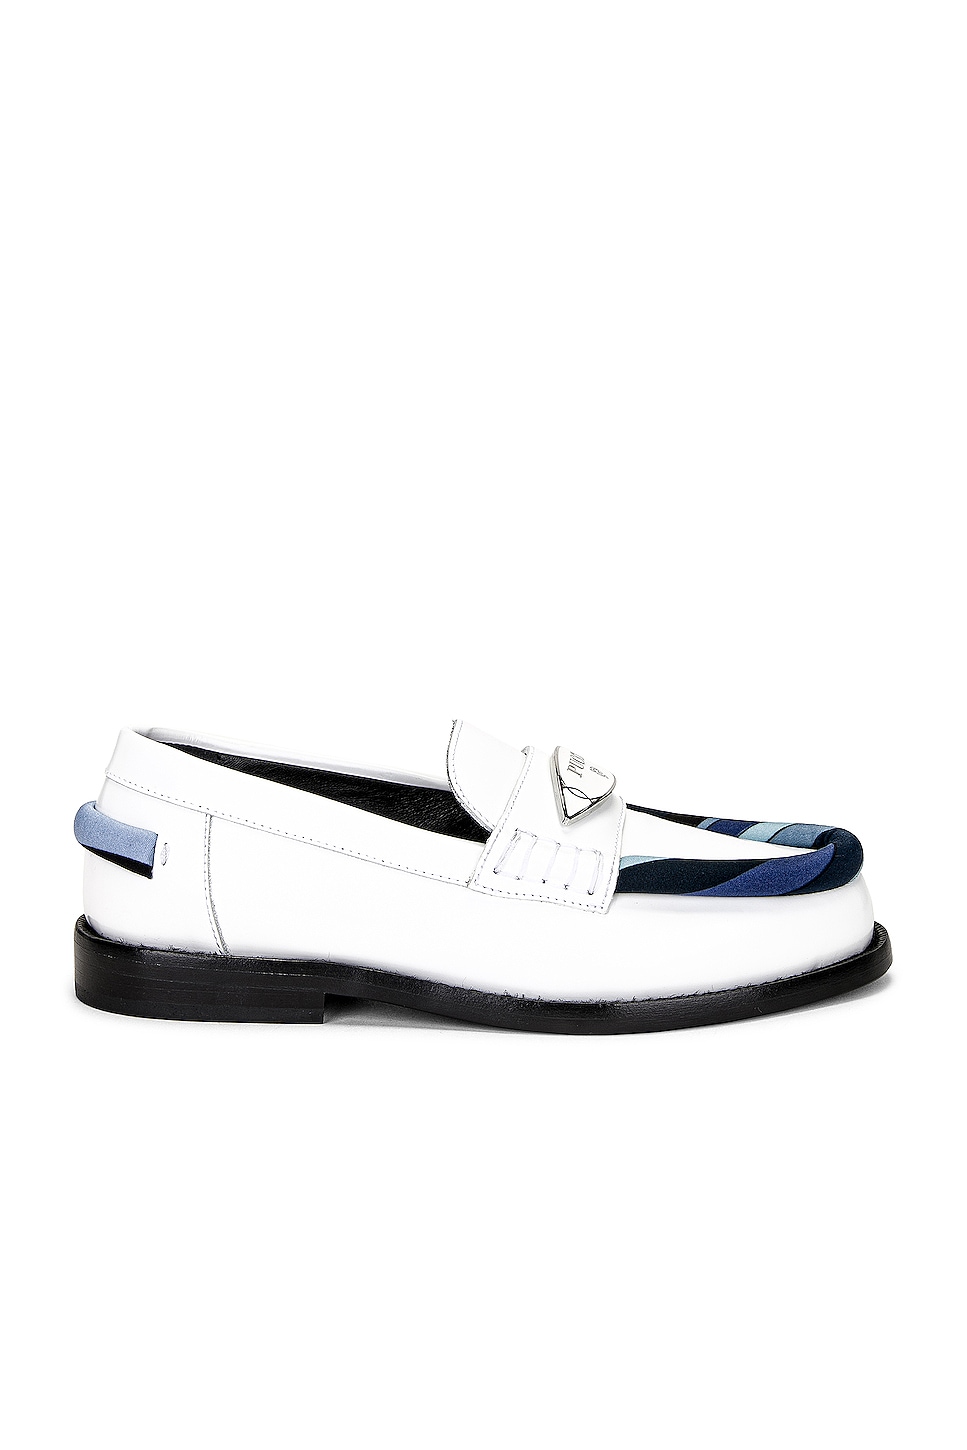 Image 1 of Emilio Pucci Penny Loafer in Bianco